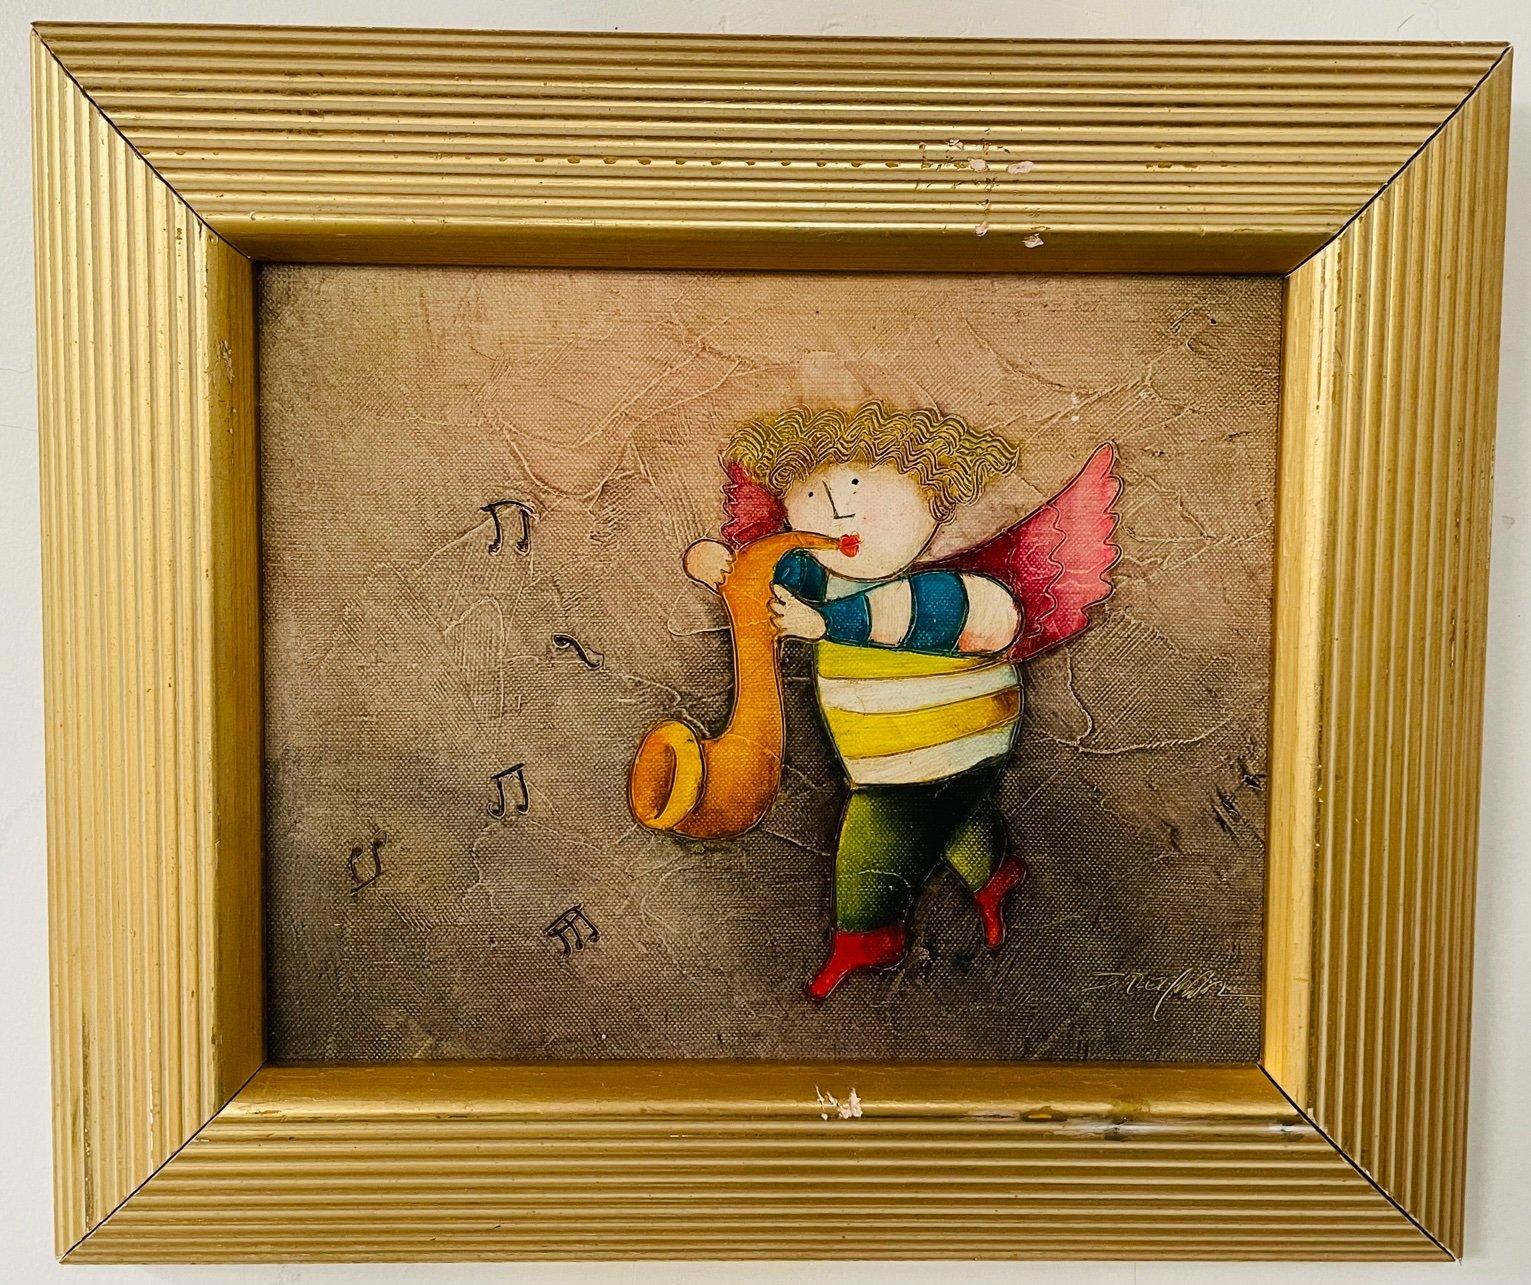 The four oil on canvas paintings depict a group of children playing different instruments in the style of Graciela Rodo Boulanger ( Bolvian , 1935) The vivid colors and beautiful different gilt frames give the paintings a distinctive look.